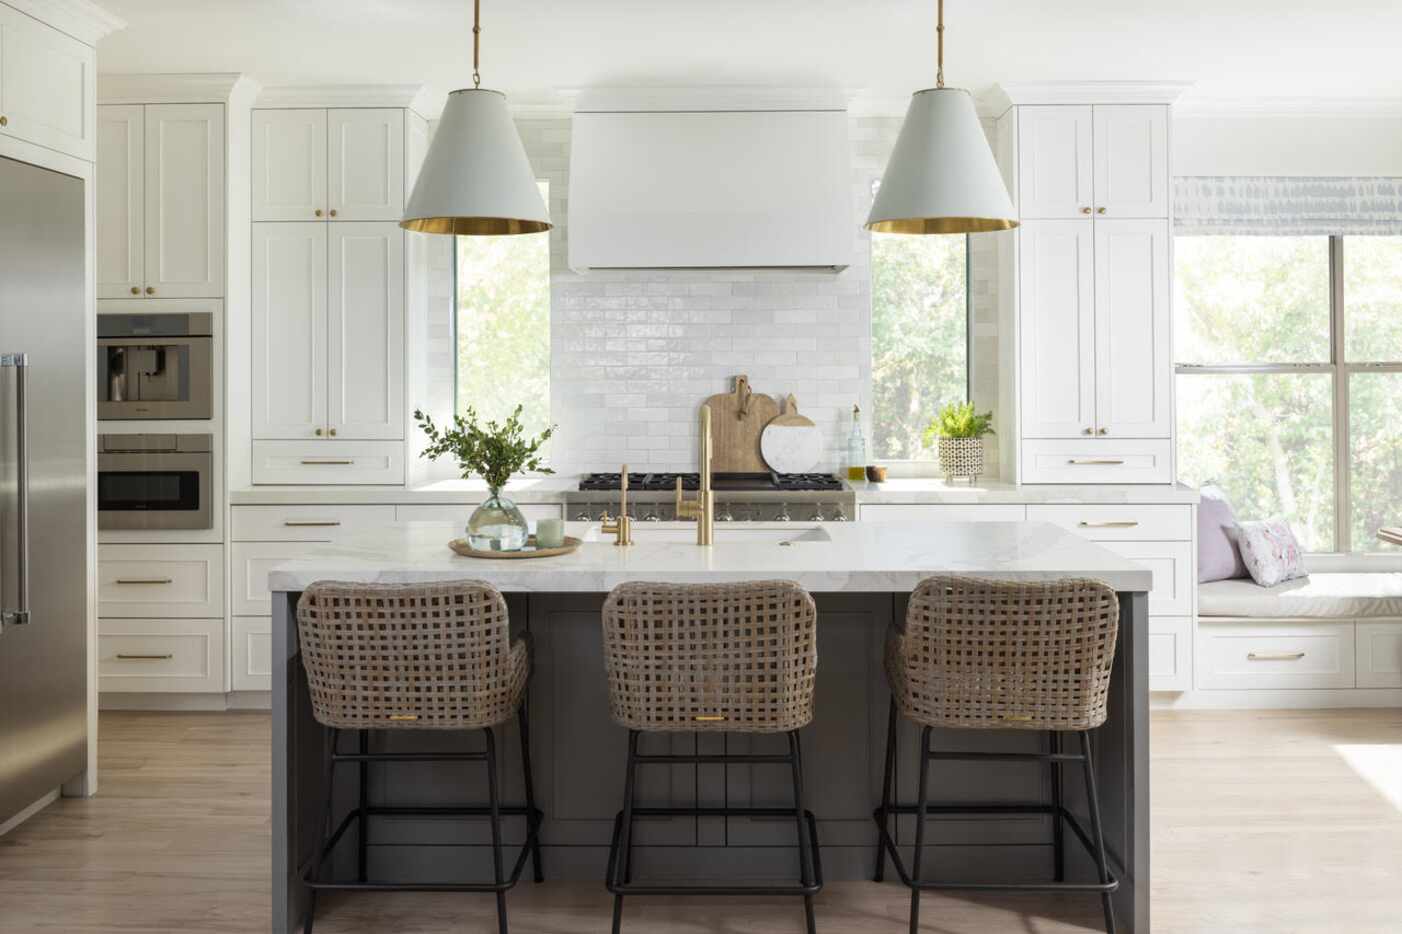 A white kitchen features a large island